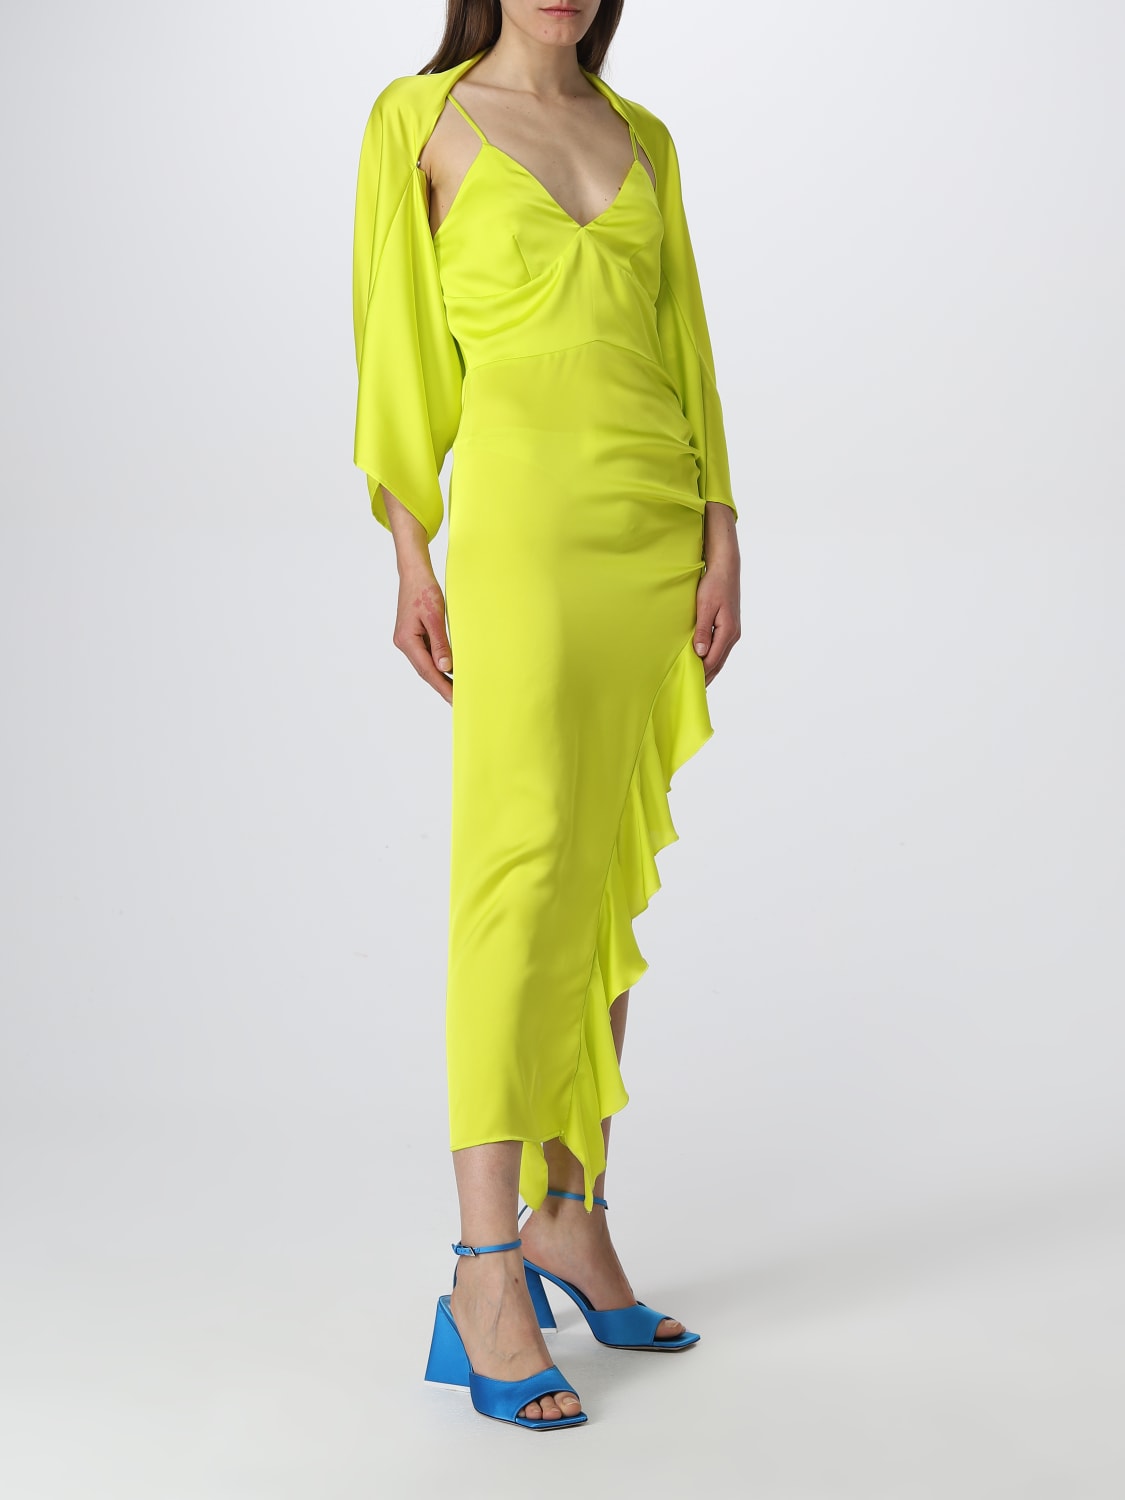 Dress Simona Corsellini: Simona Corsellini dress for women lime 2